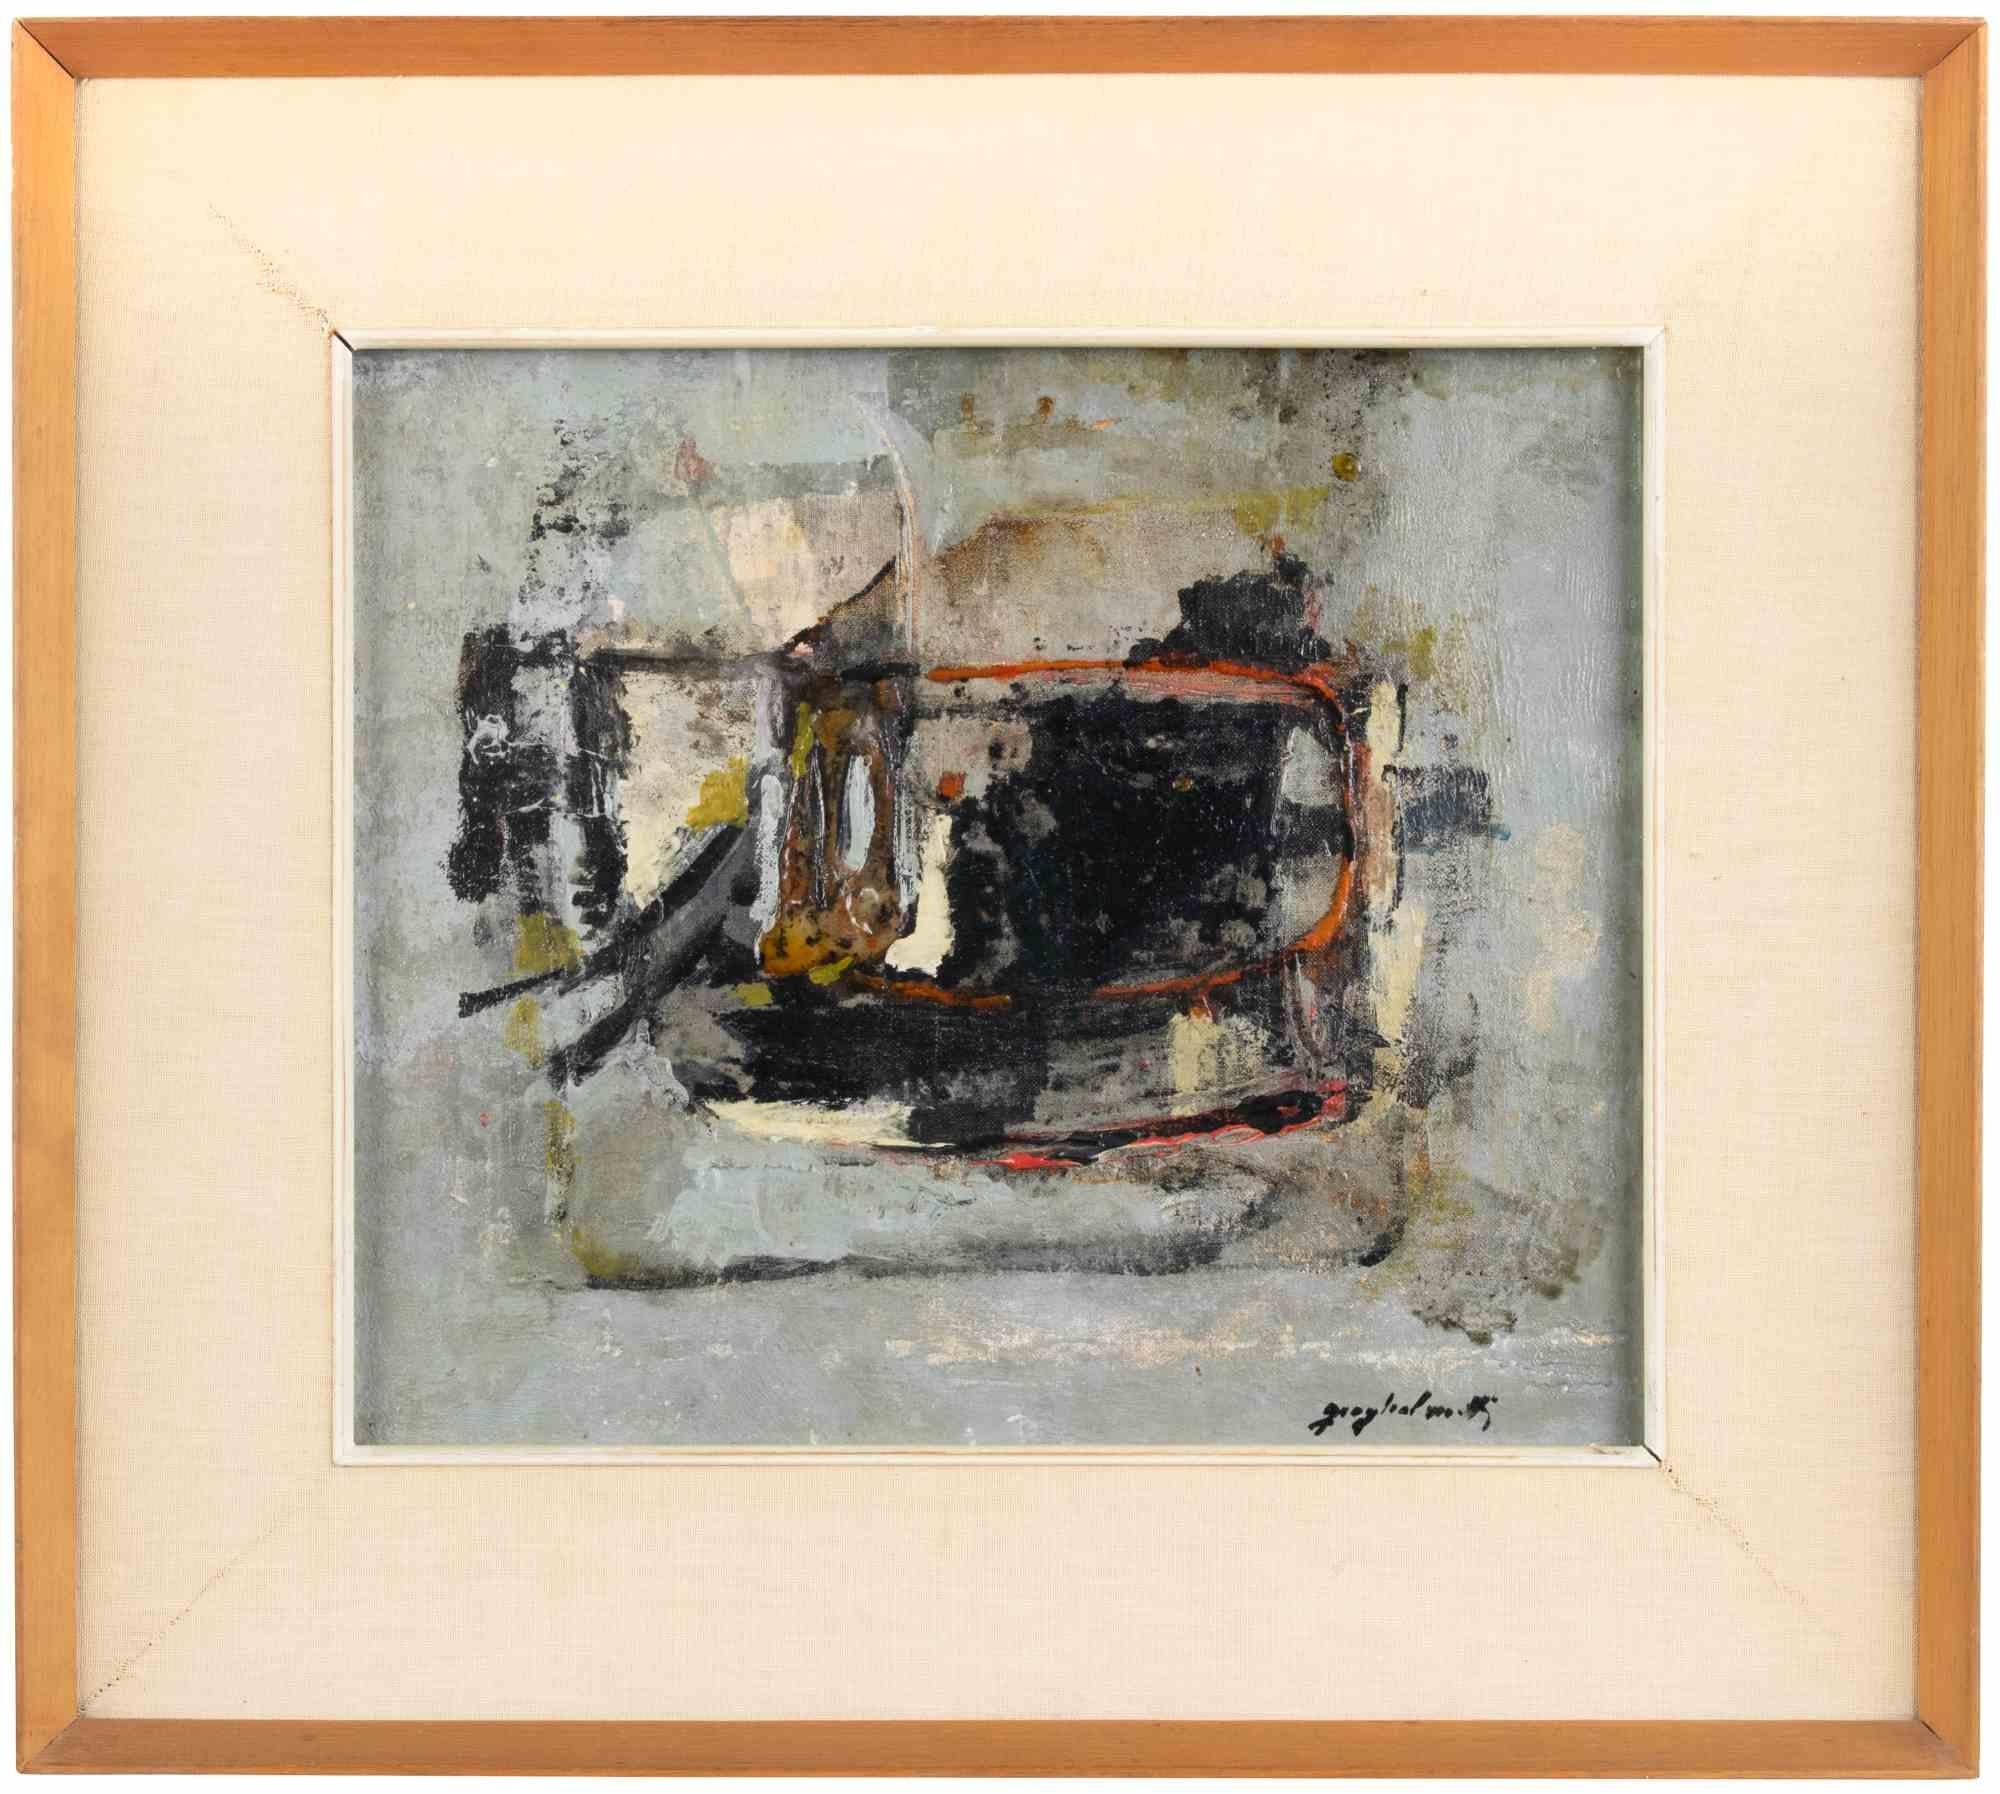 Untitled is a modern artwork realized by Mario Guglielmotti.

Mixed media on canvas.

Hand signed on the lower margin.

Includes frame

